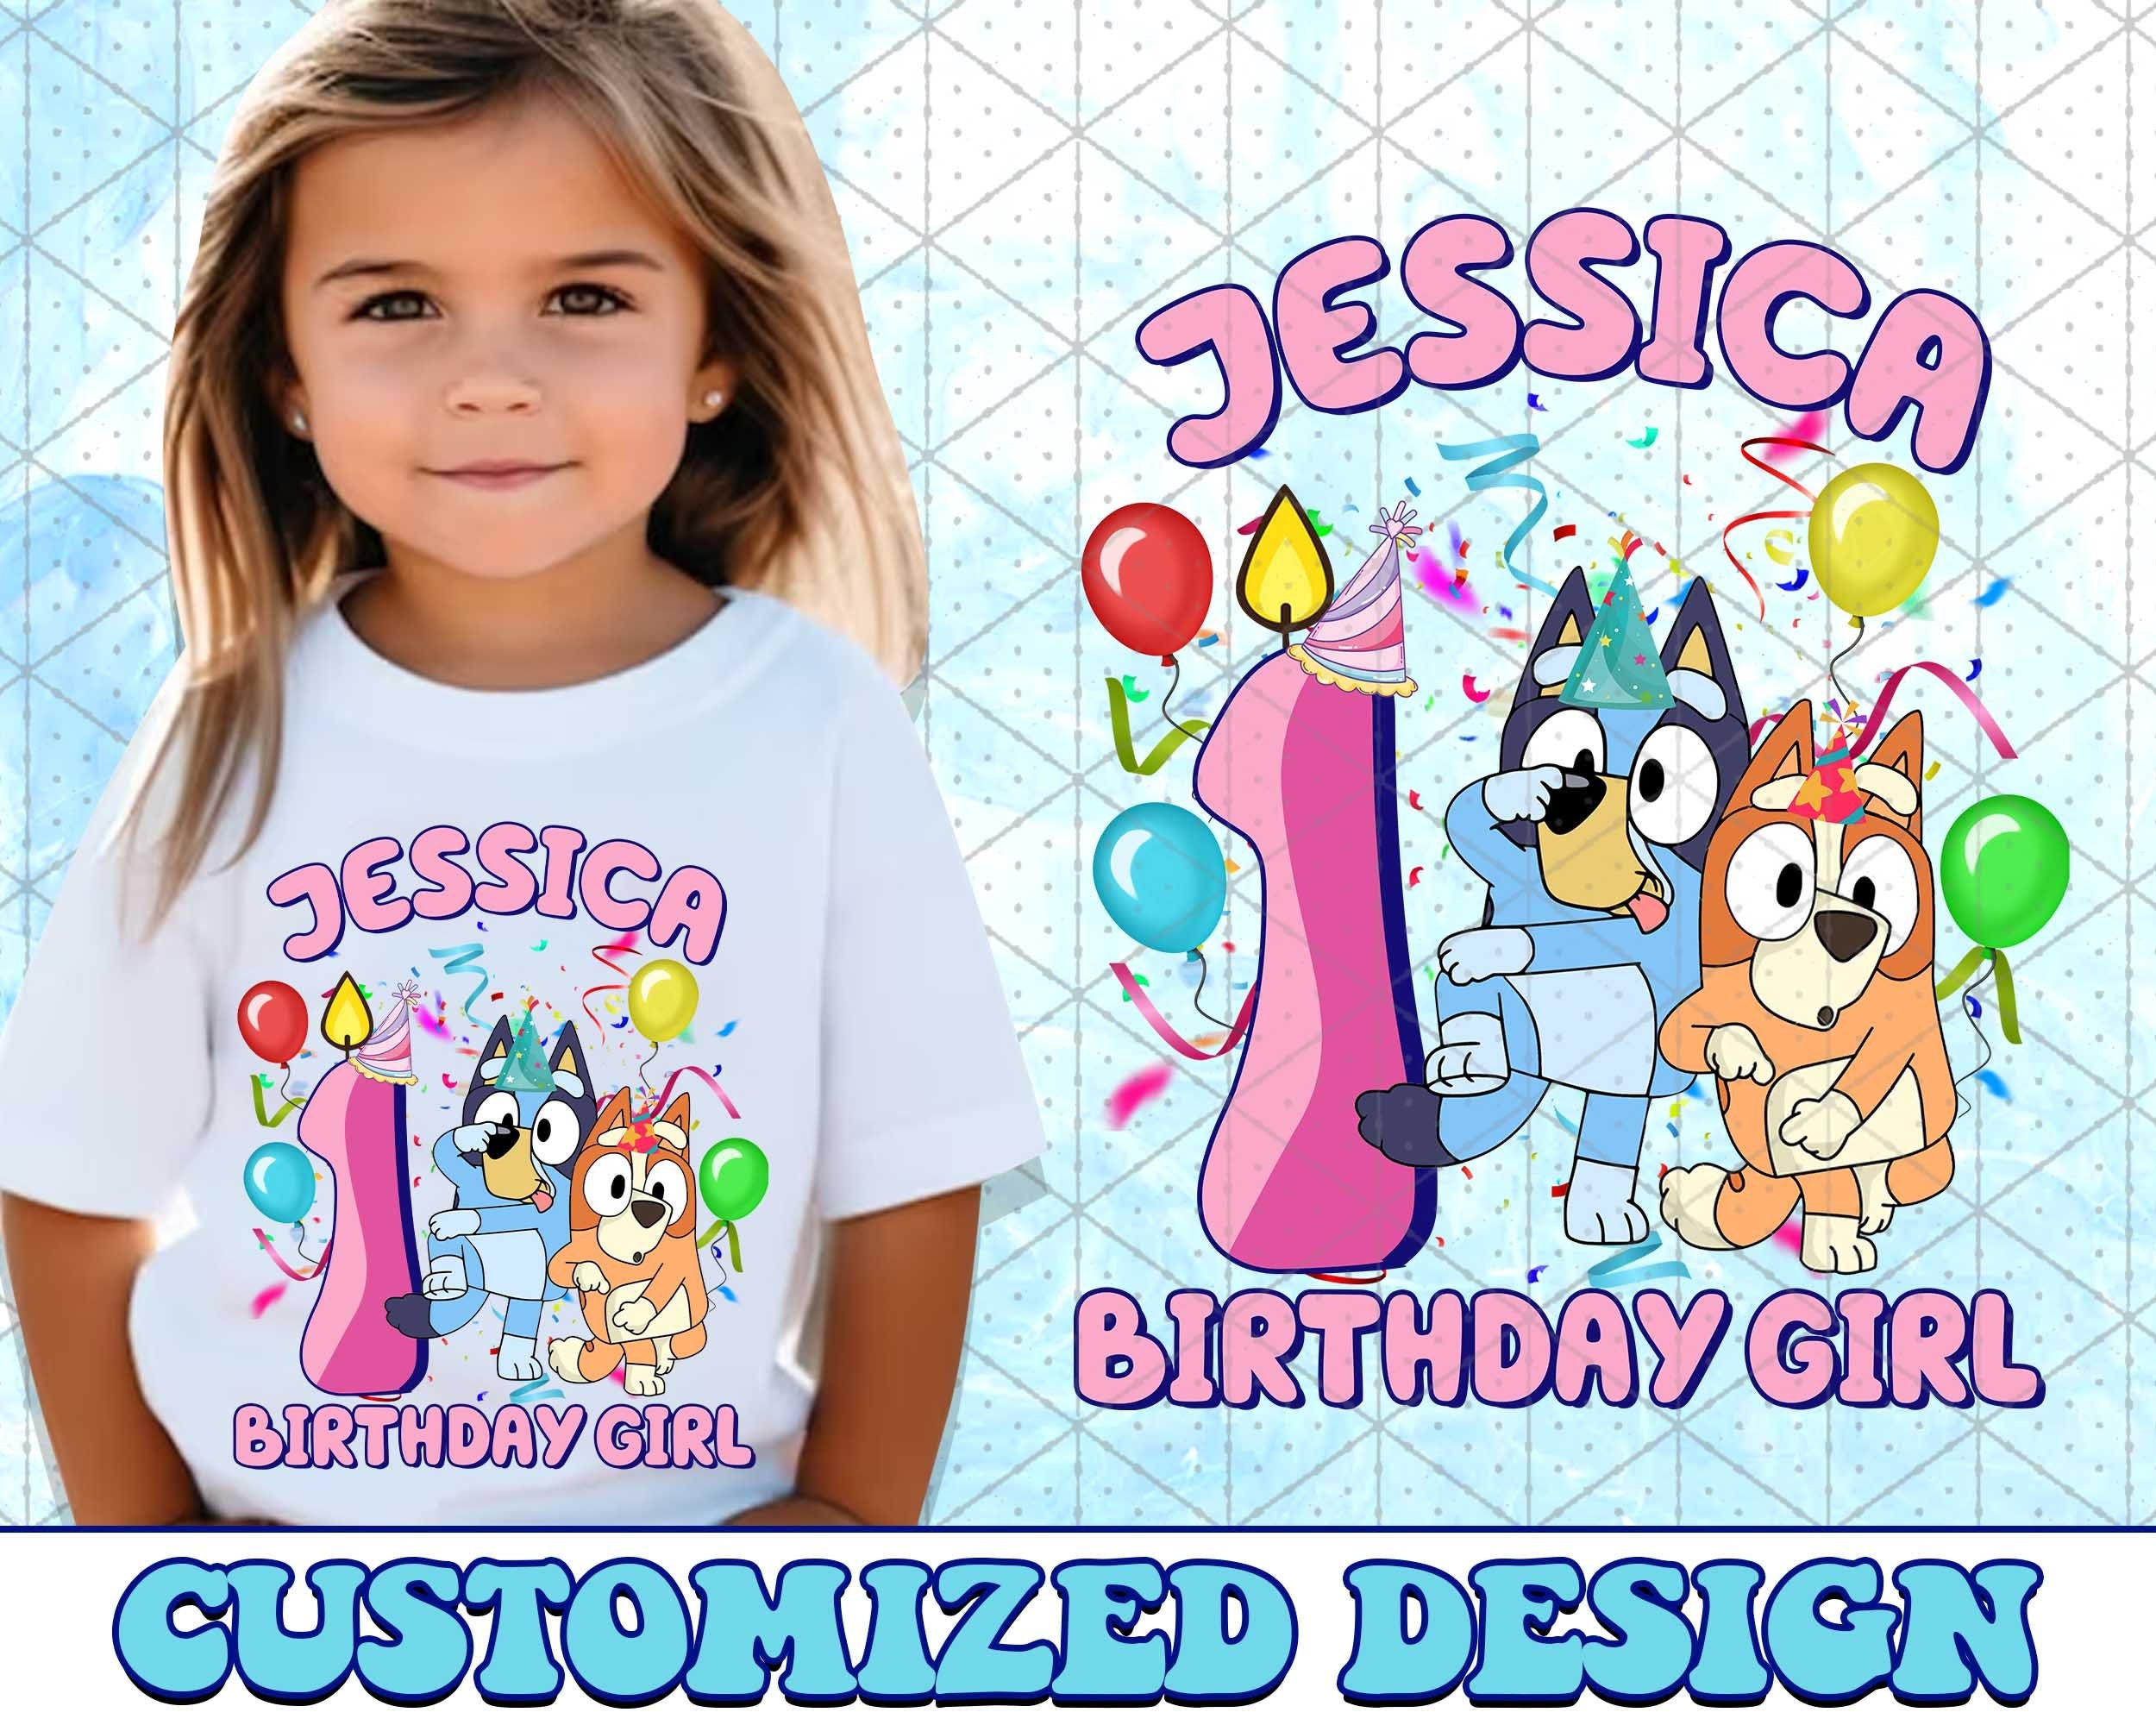 Customized Bluey Birthday PNG, Bluey Family PNG, Bluey The Eras Tour Png, Bluey Bingo Png, Bluey Mom Png, Bluey Dad Png, Bluey Friends